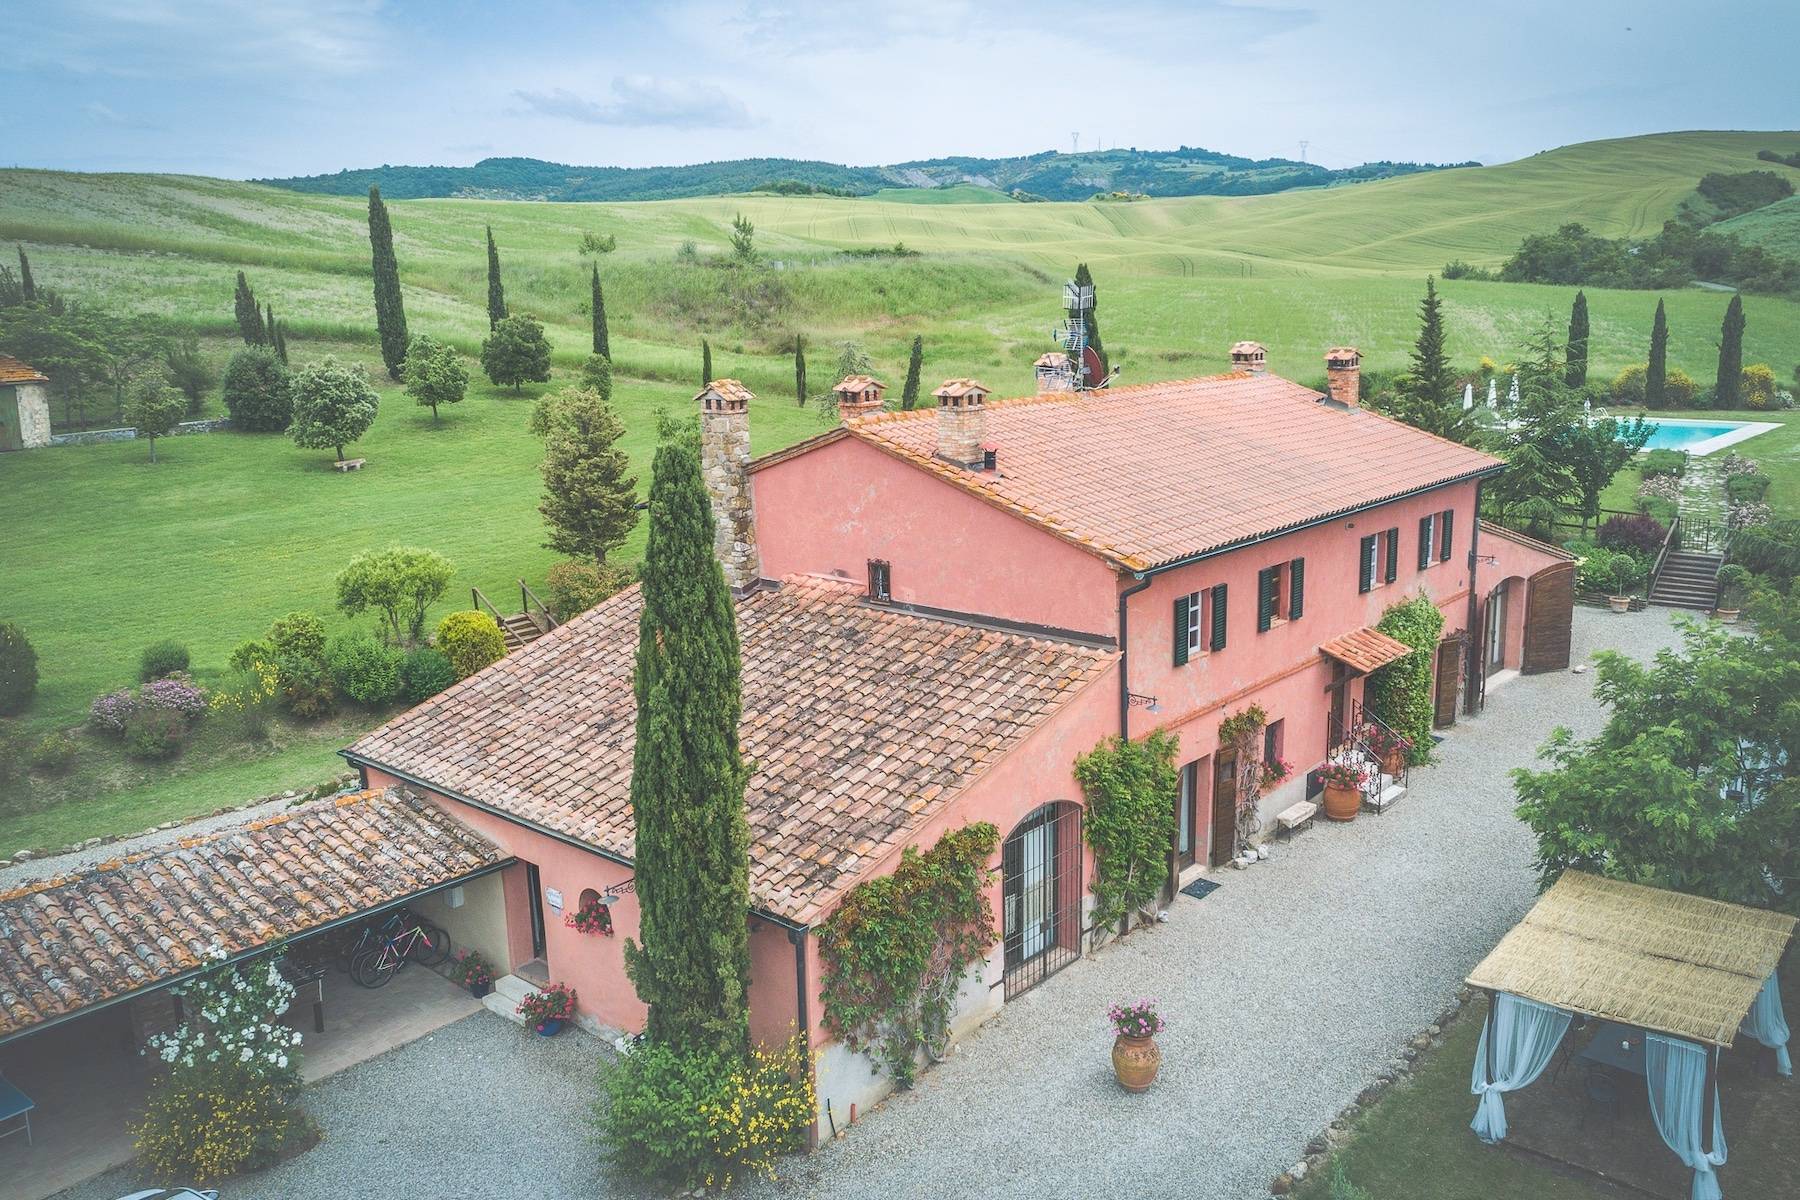 Farmhouse located in the hills of the Val D'Orcia